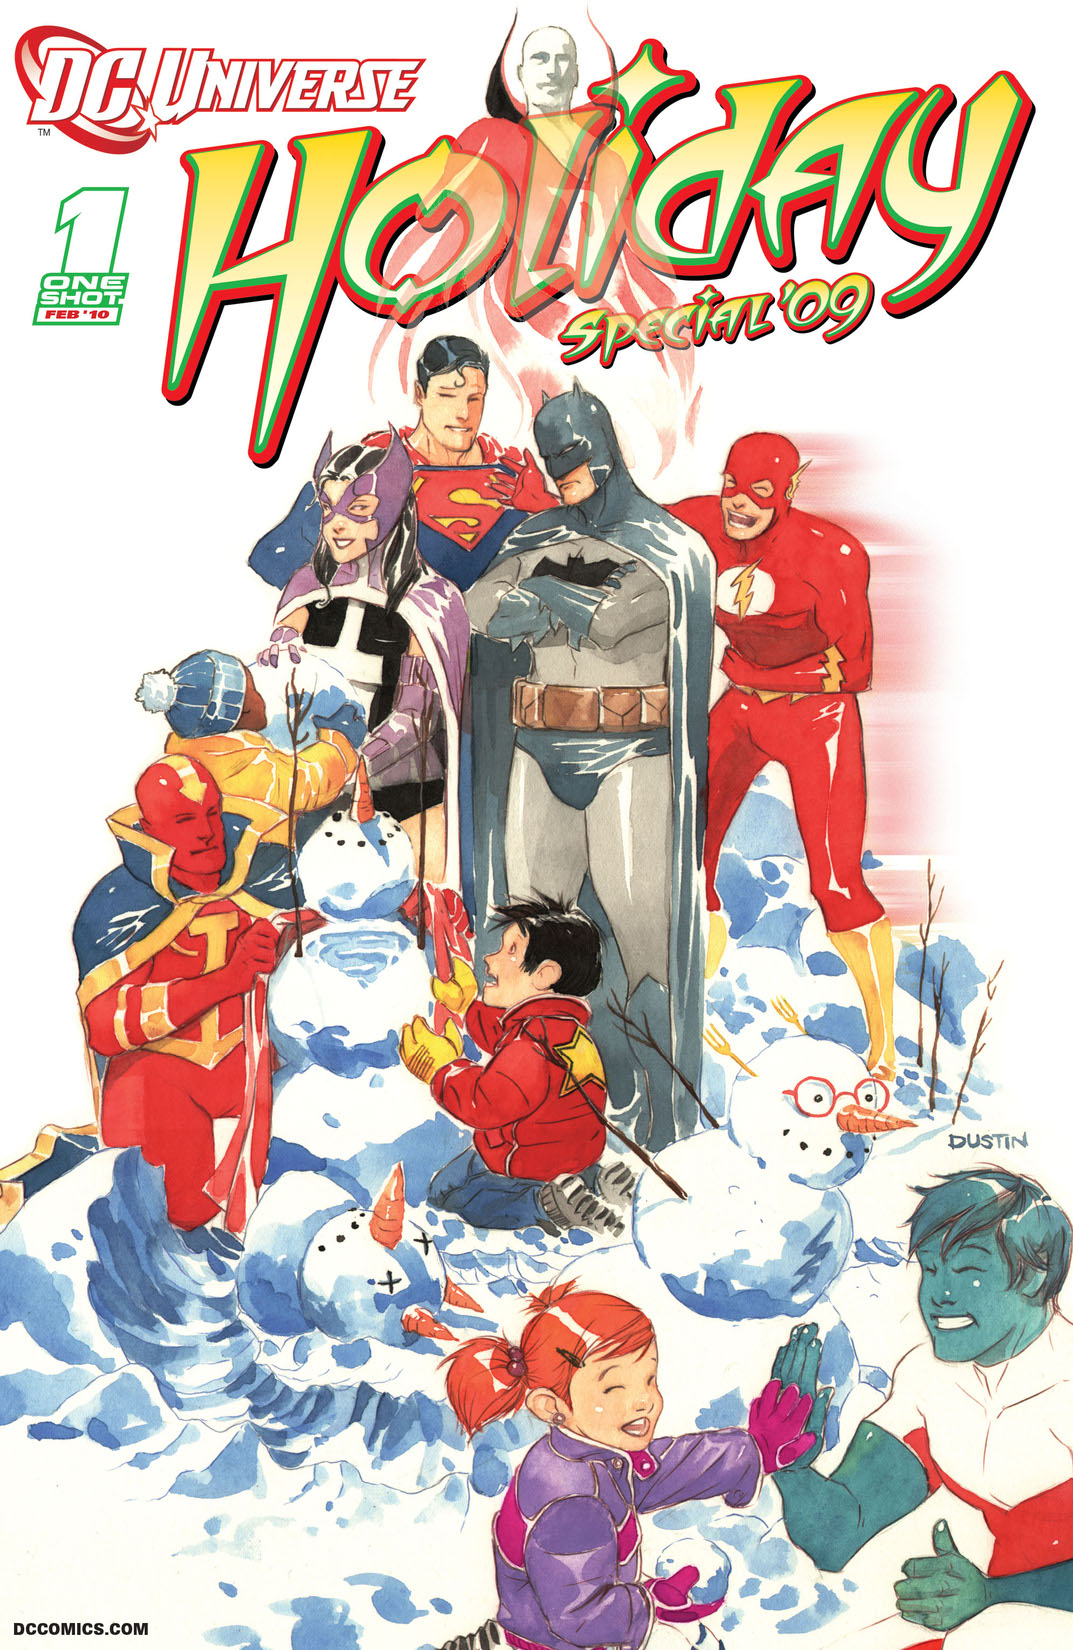 DC Holiday Special '09 #1 preview images